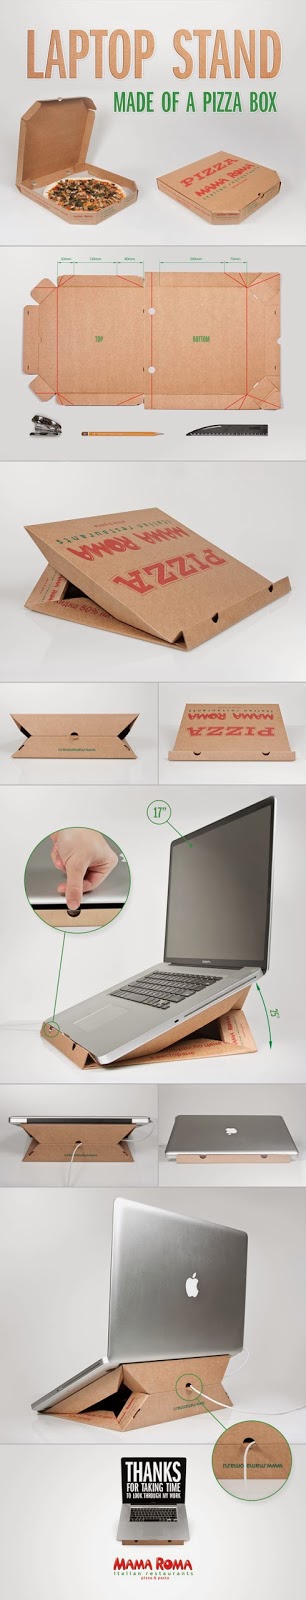 Recycling Laptop stand made of a pizza box